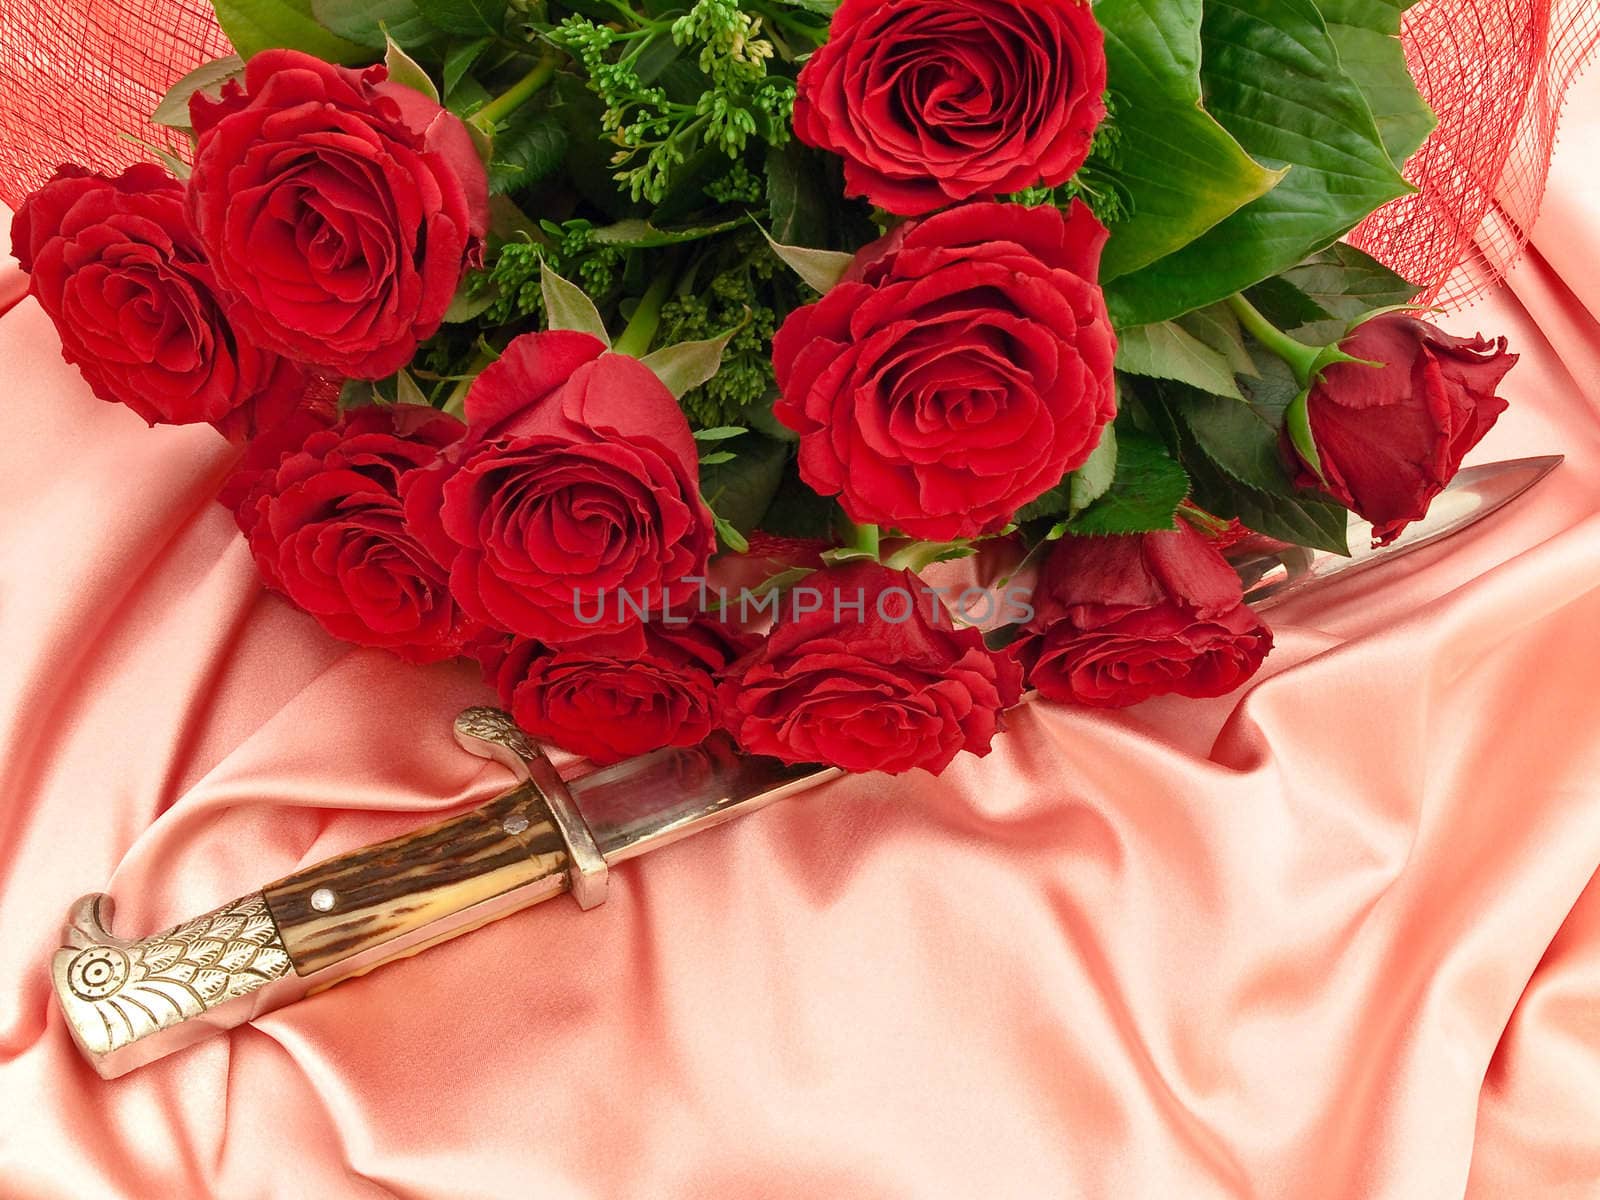 dagger near the red beautiful roses on a pink silk fabric 